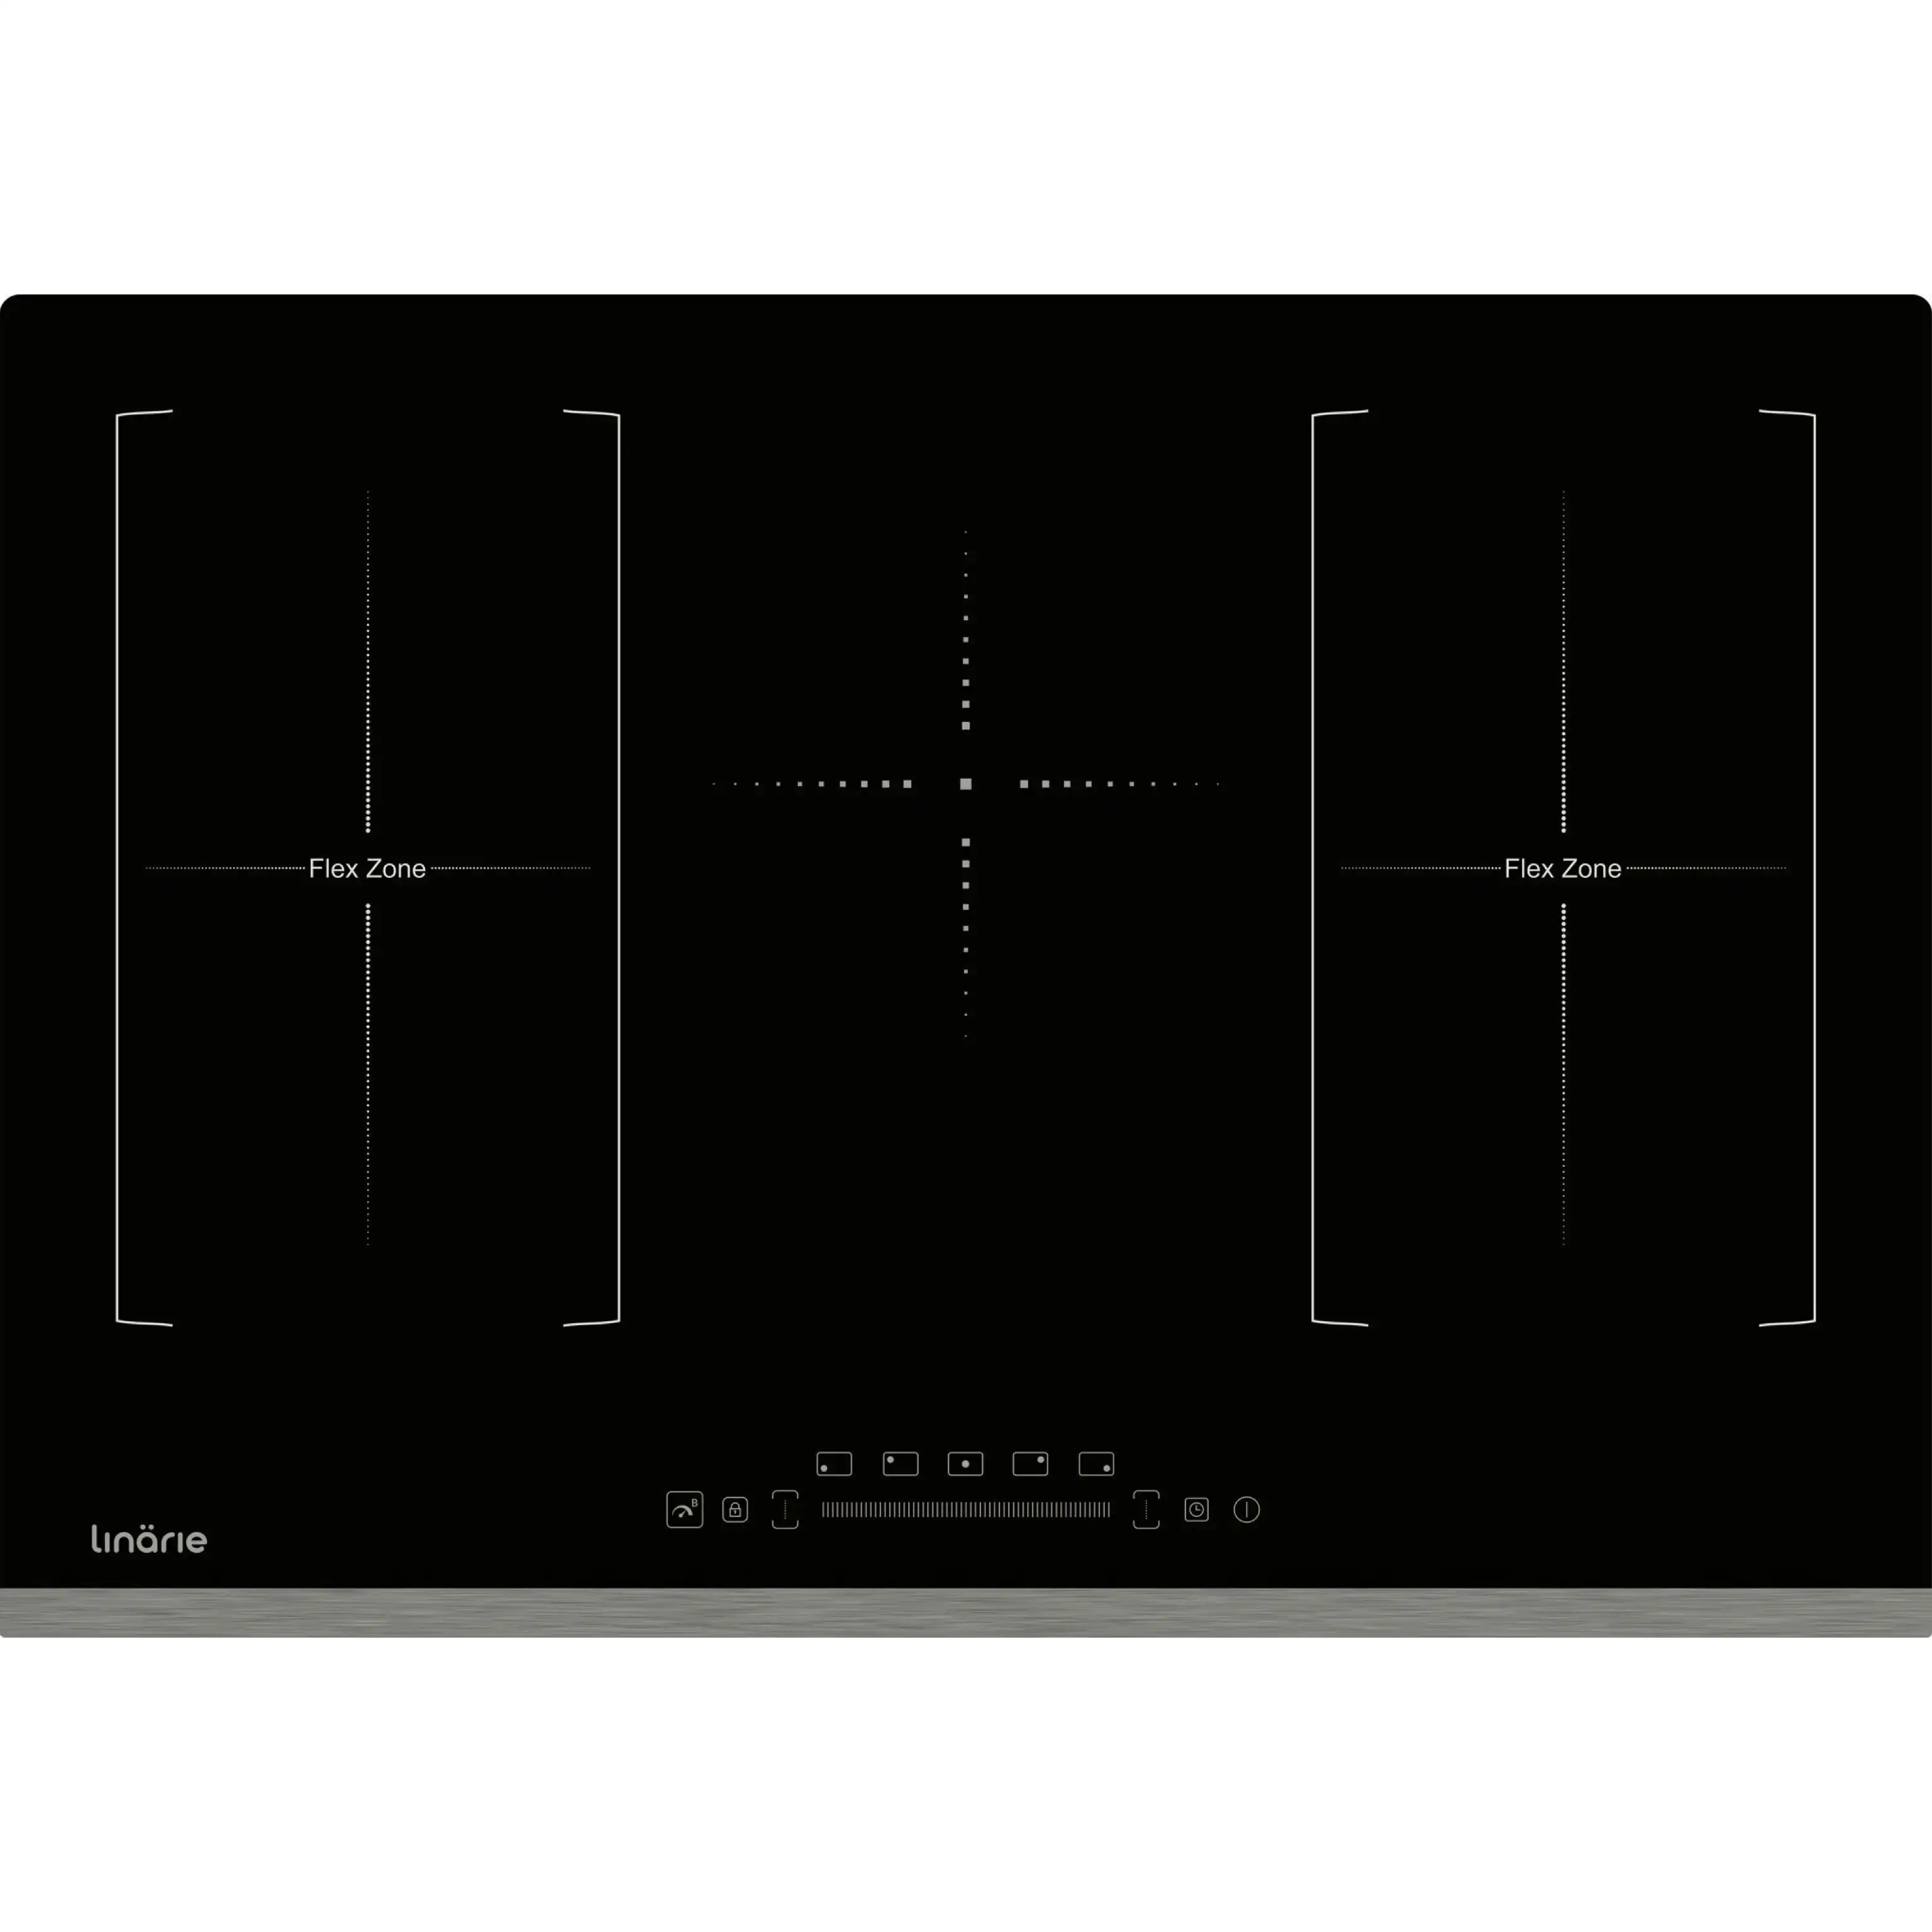 Linarie 77cm 4 Zone Induction Double Flex Zone Cooktop